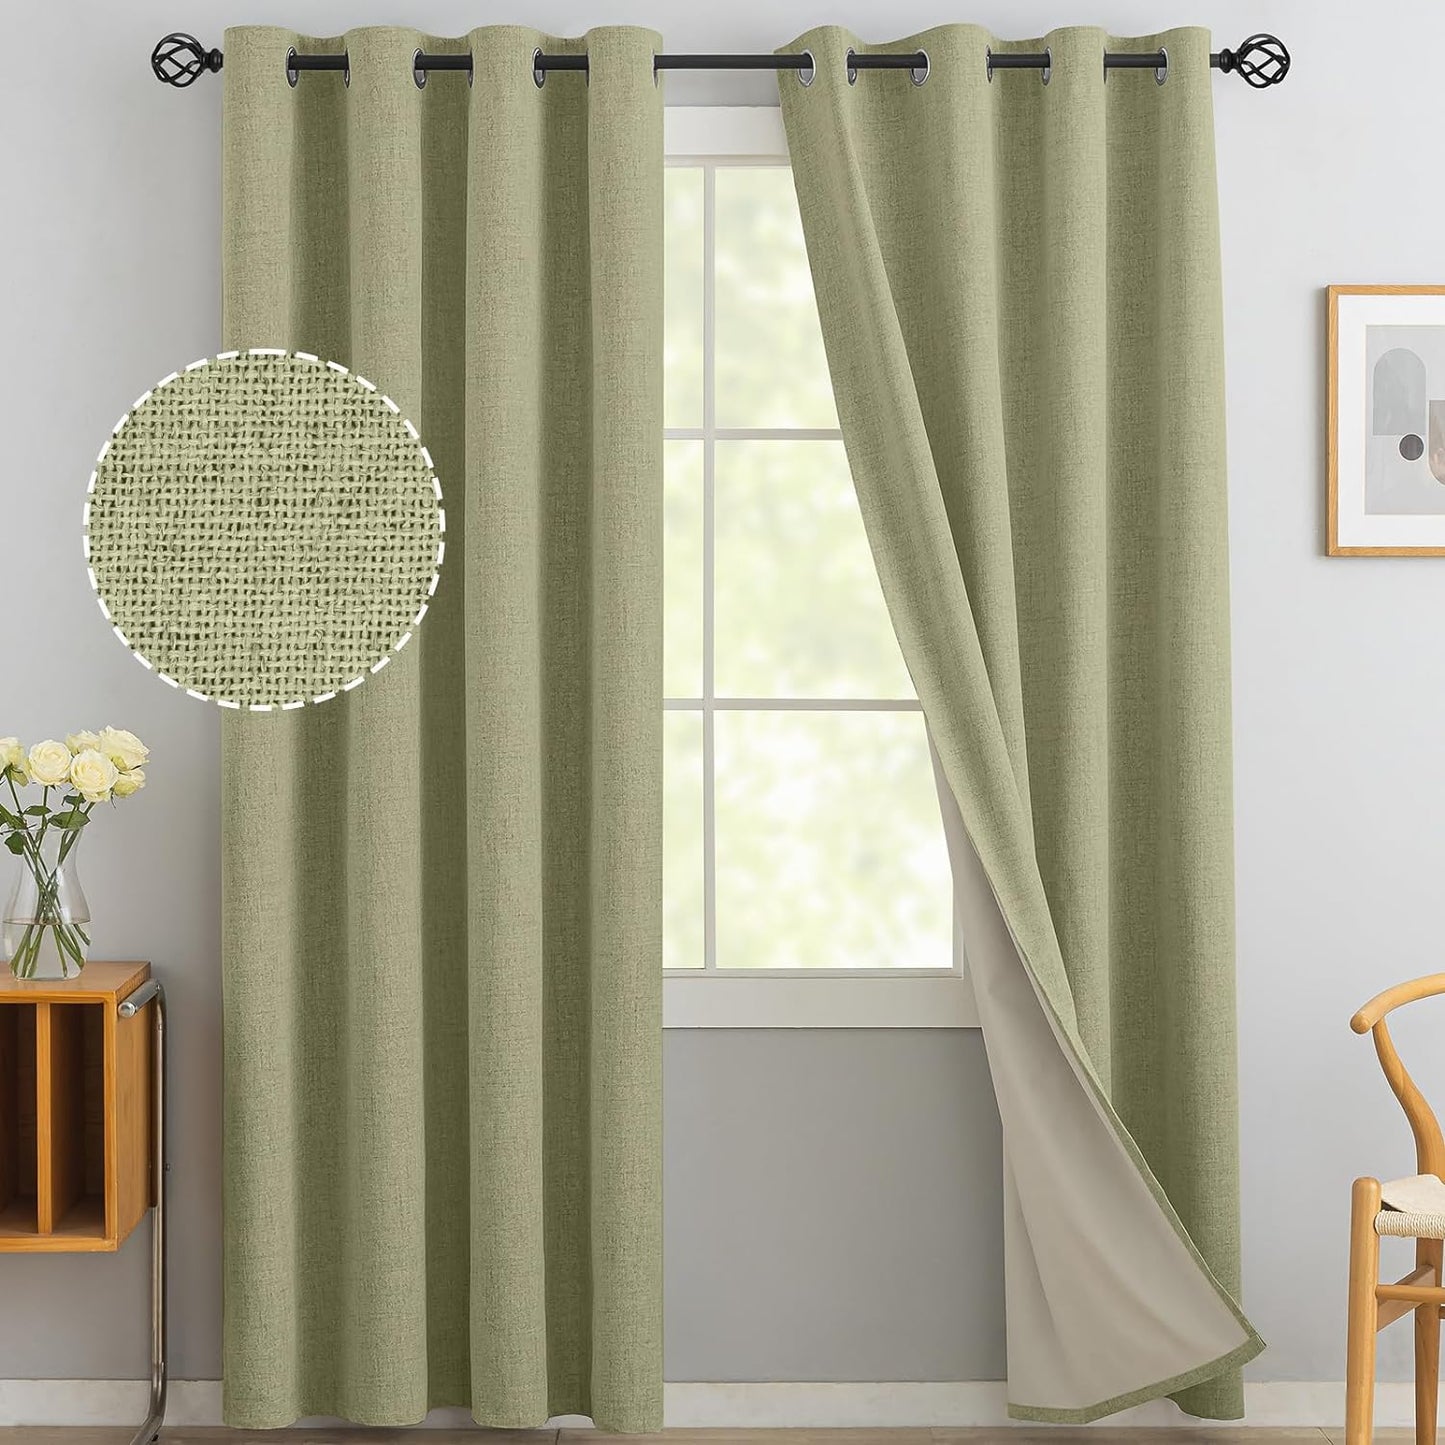 Yakamok Natural Linen Curtains 100% Blackout 84 Inches Long,Room Darkening Textured Curtains for Living Room Thermal Grommet Bedroom Curtains 2 Panels with Greyish White Liner  Yakamok Sage Green 52W X 90L / 2 Panels 